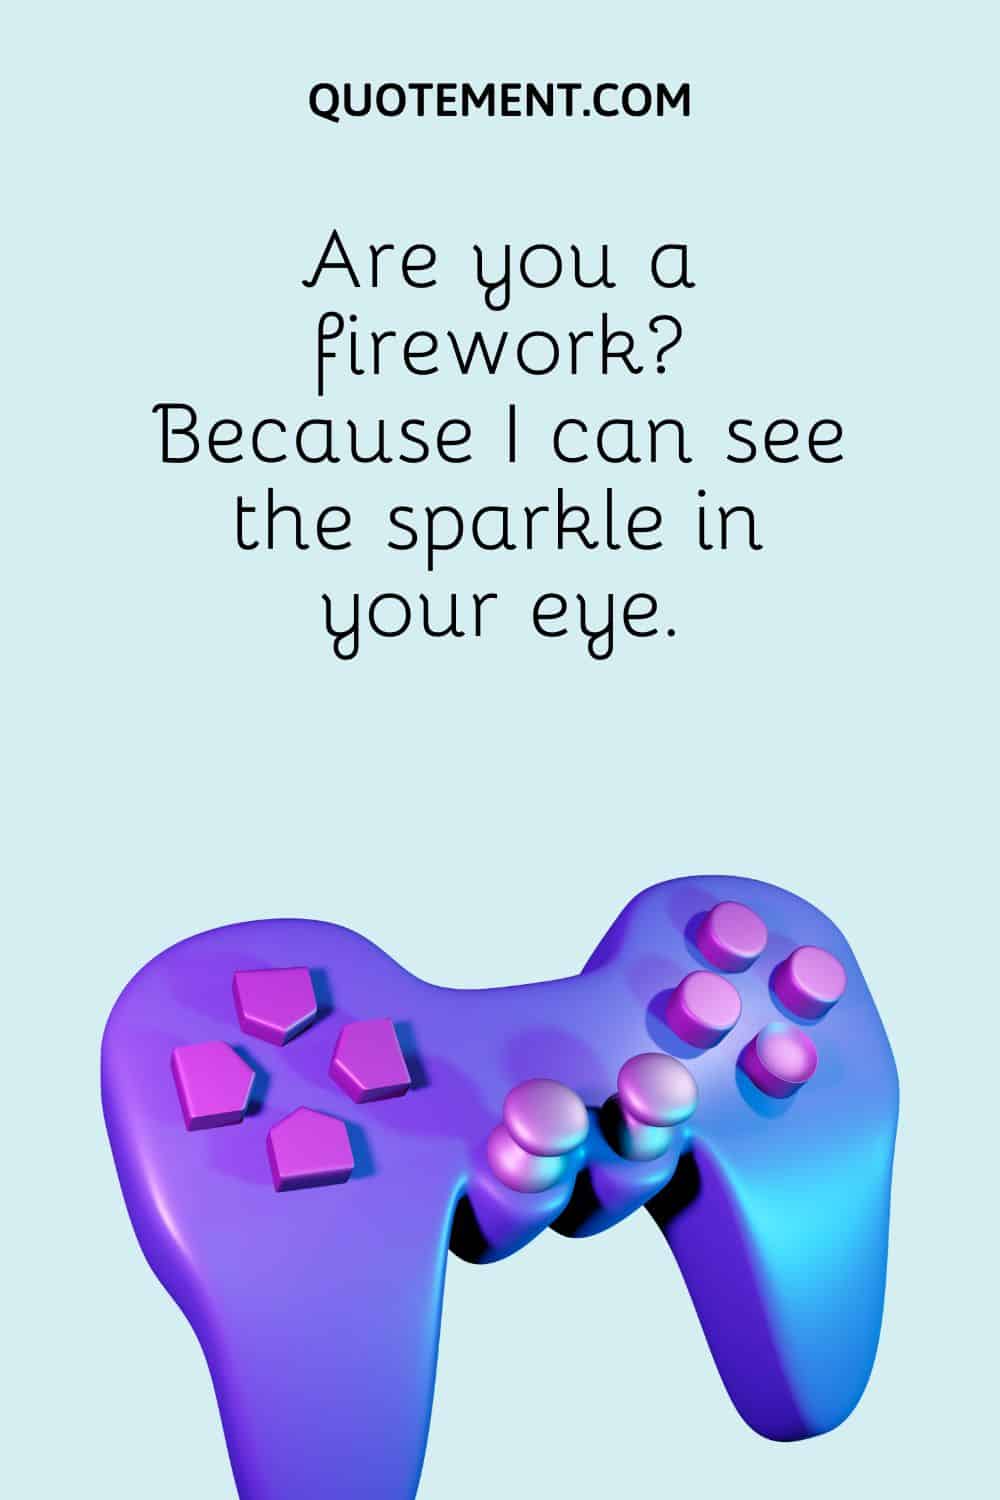 Are you a firework Because I can see the sparkle in your eye.